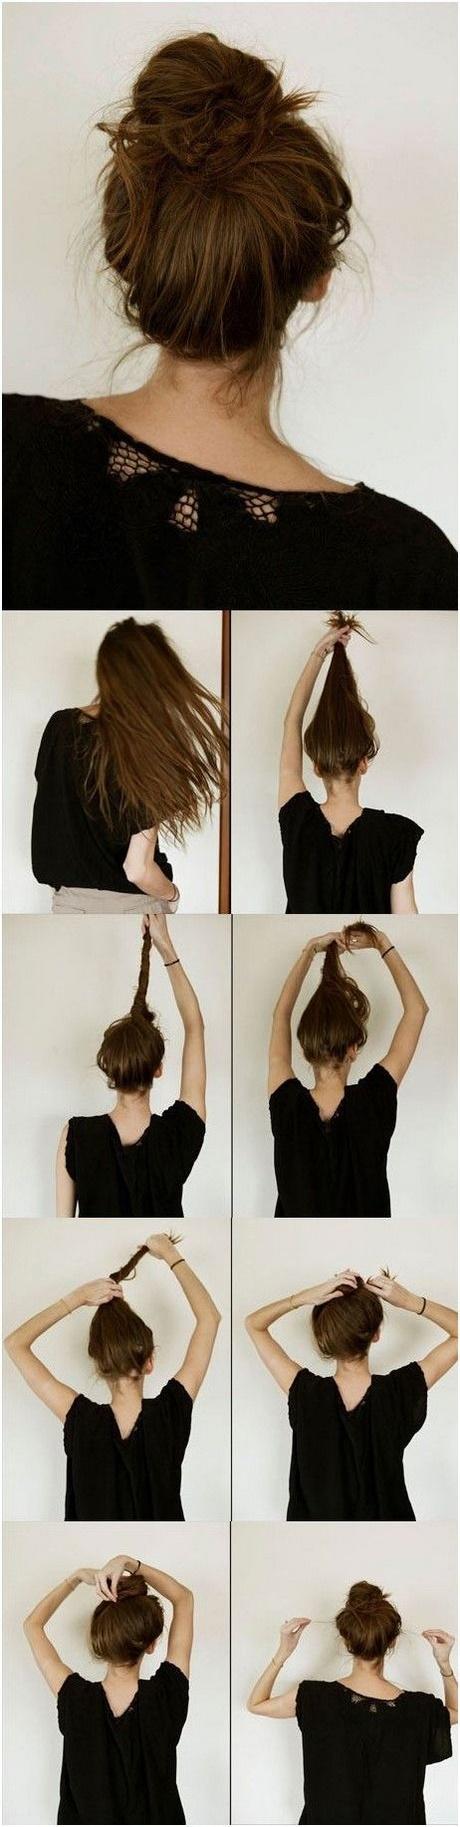 Simple daily wear hairstyles simple-daily-wear-hairstyles-30_5